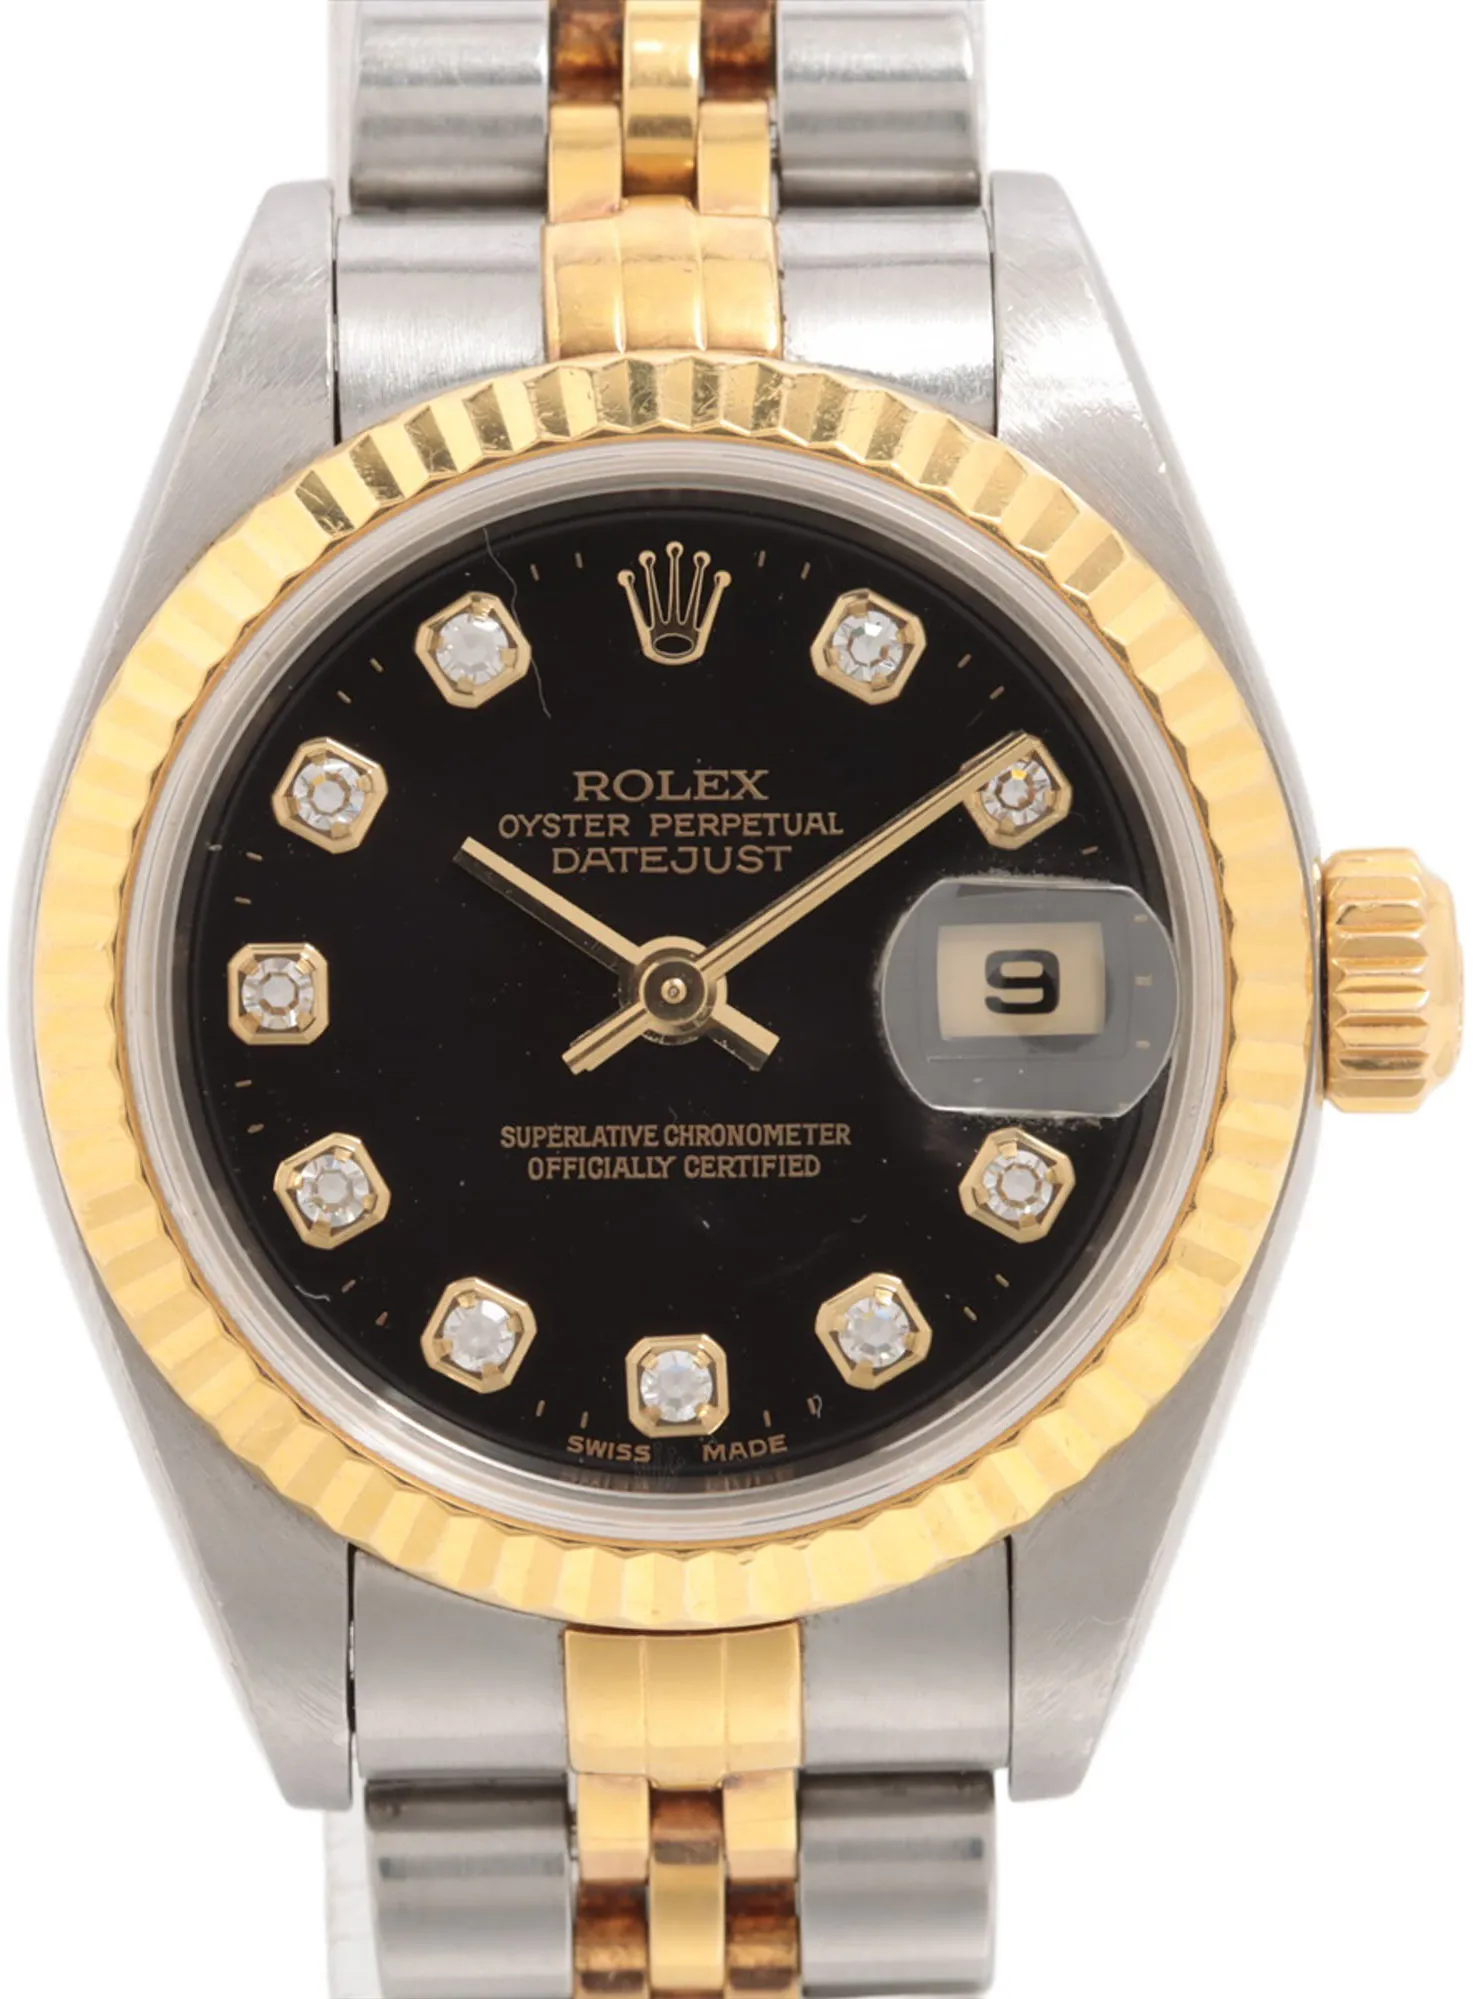 Rolex Datejust 79173NR 36mm Yellow gold and stainless steel Champagne